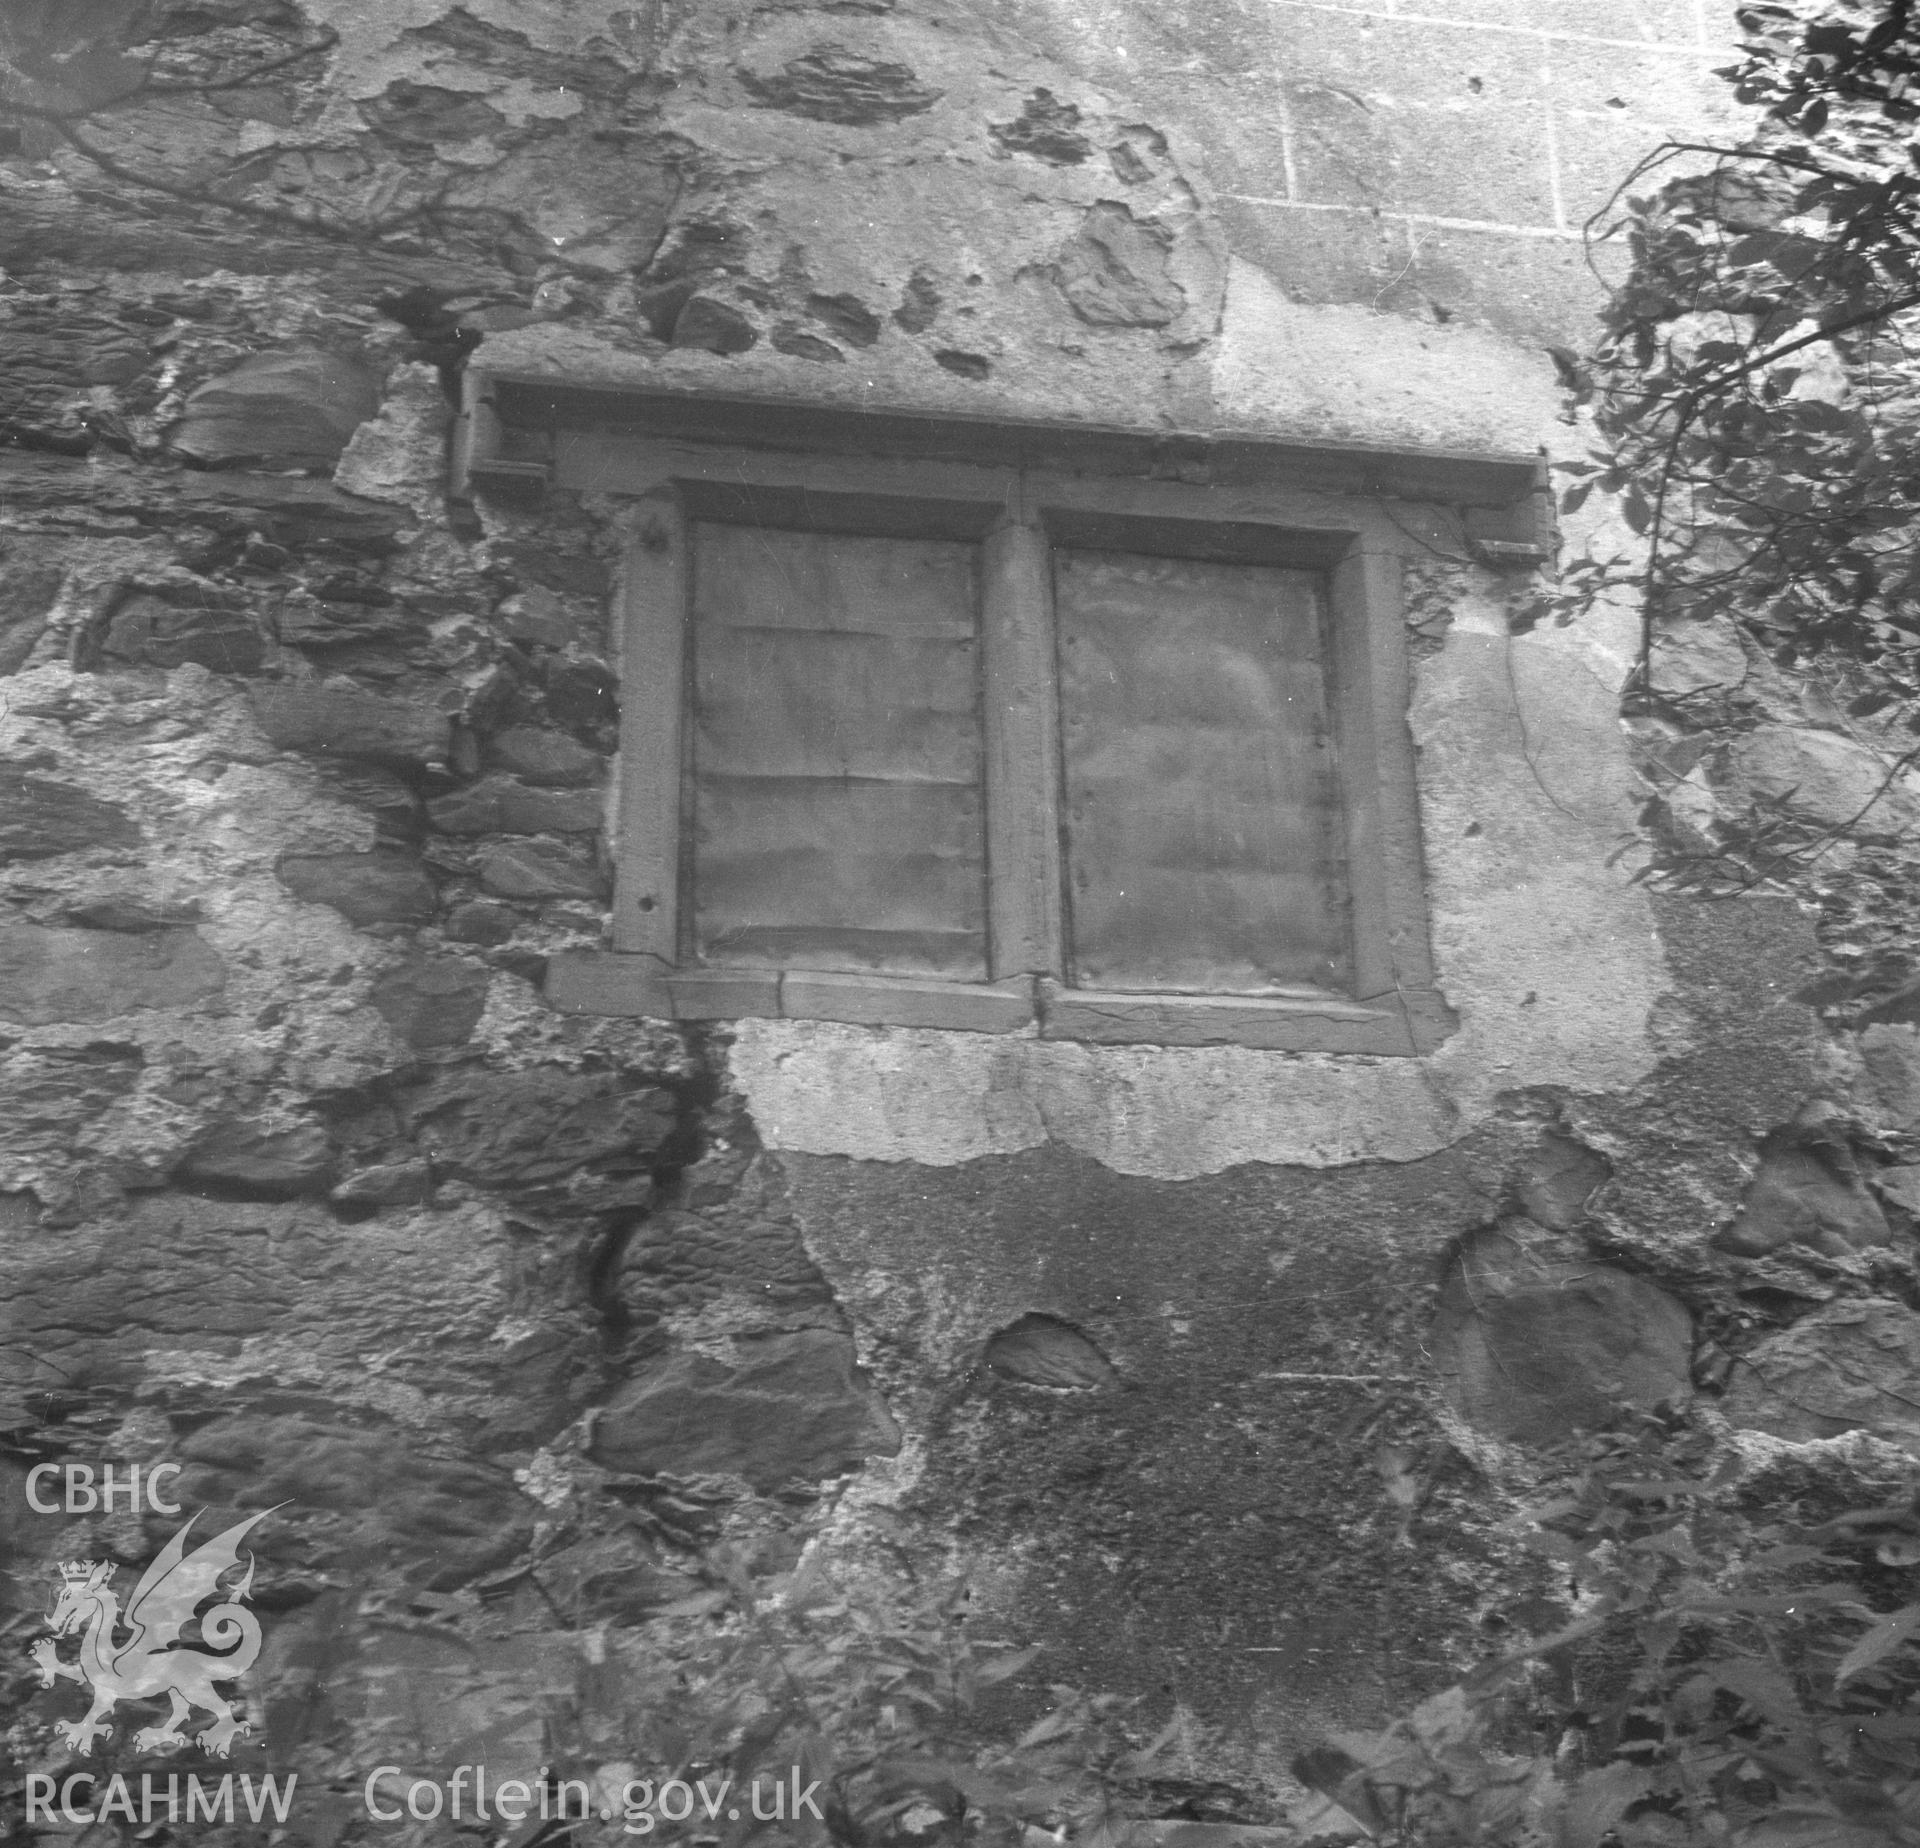 Black and white nitrate negative showing exterior view of  window detail, Brithdir Mawr, Flintshire.